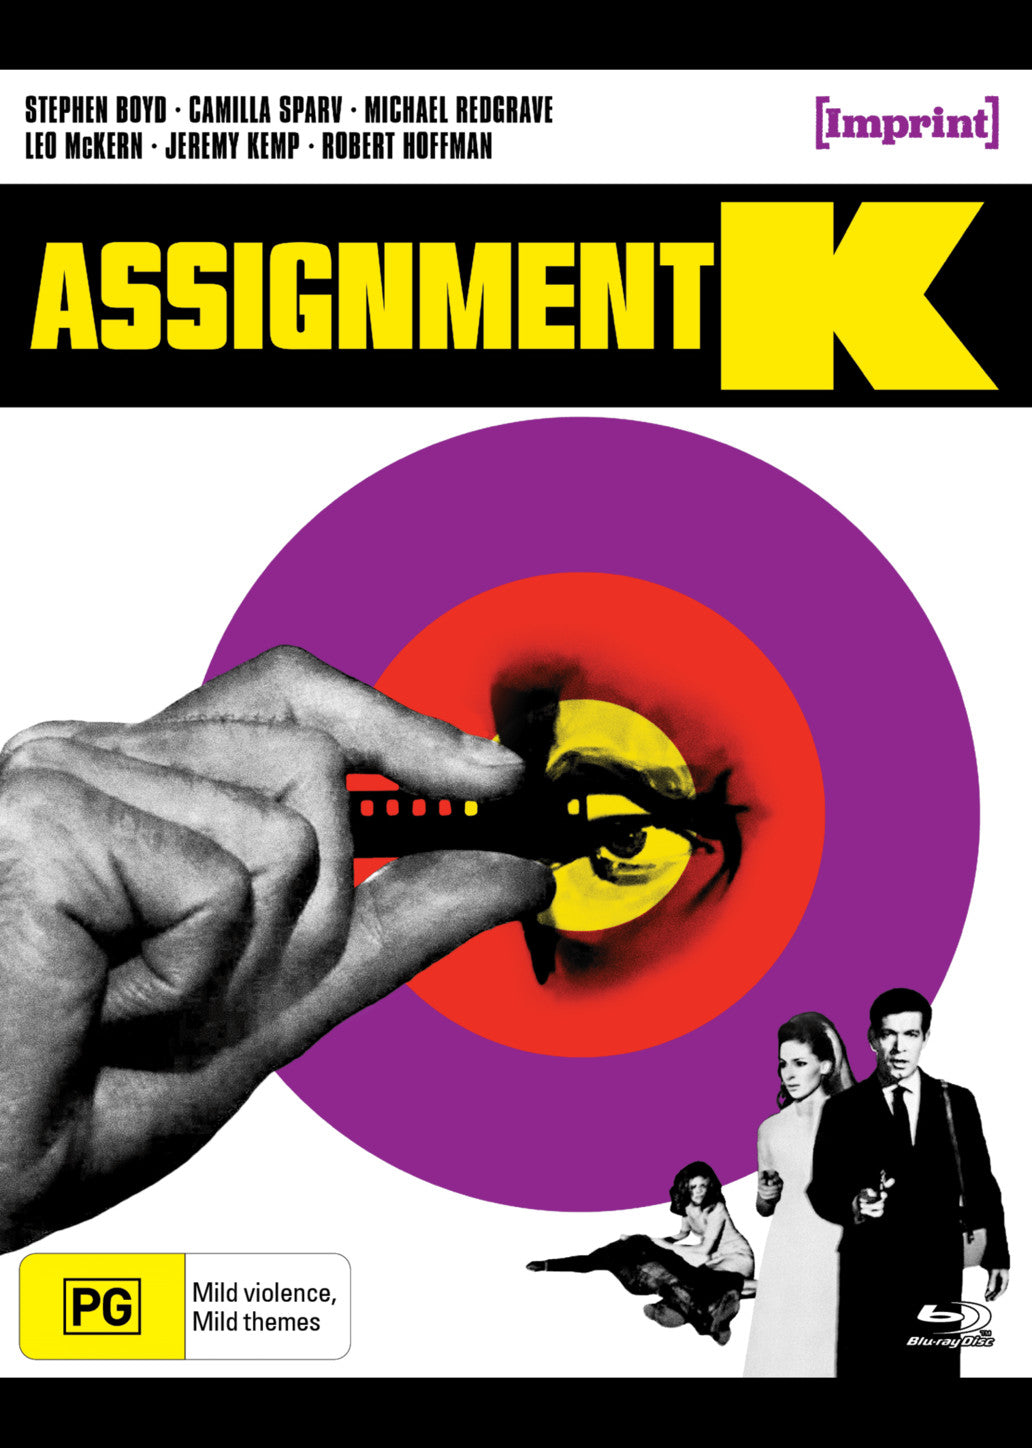 ASSIGNMENT K (IMPRINT COLLECTION #270)